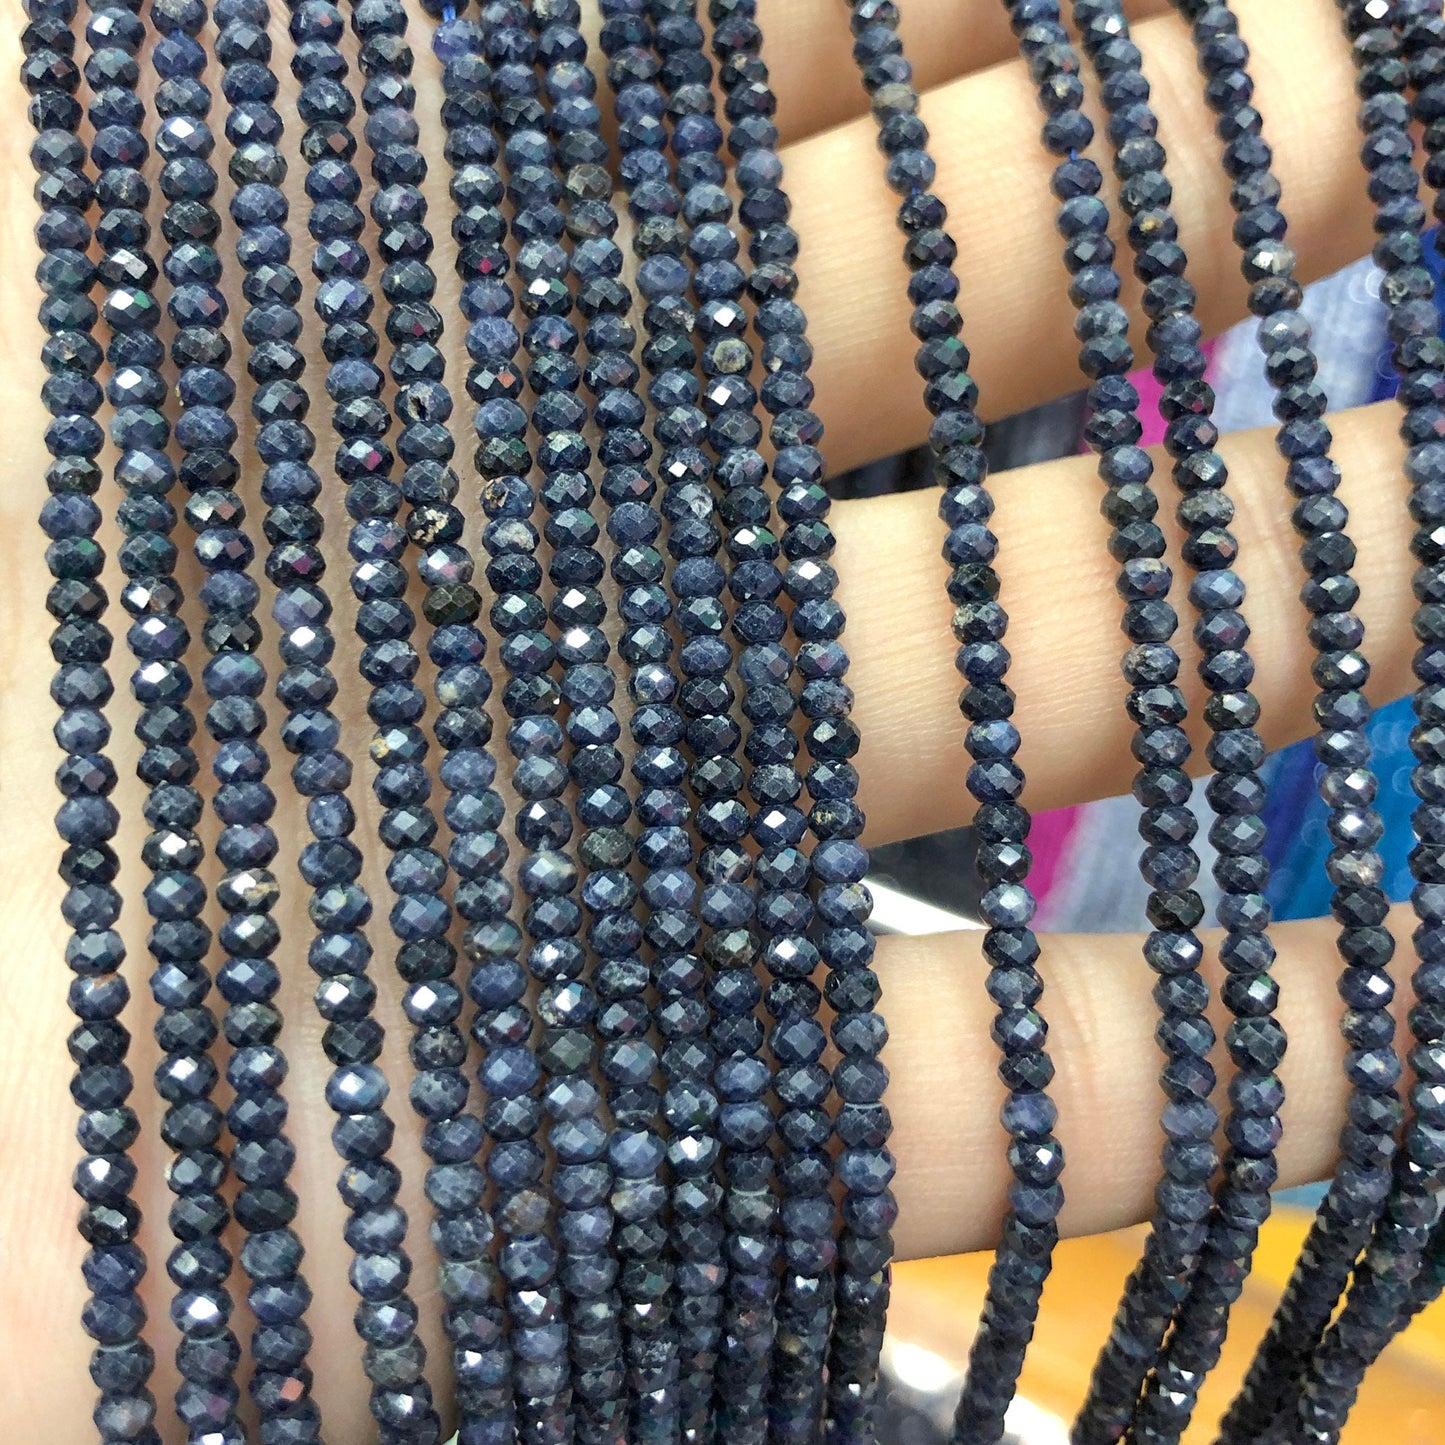 Sapphire Nice Cut Rondelle Faceted Beads 2x3mm 15''